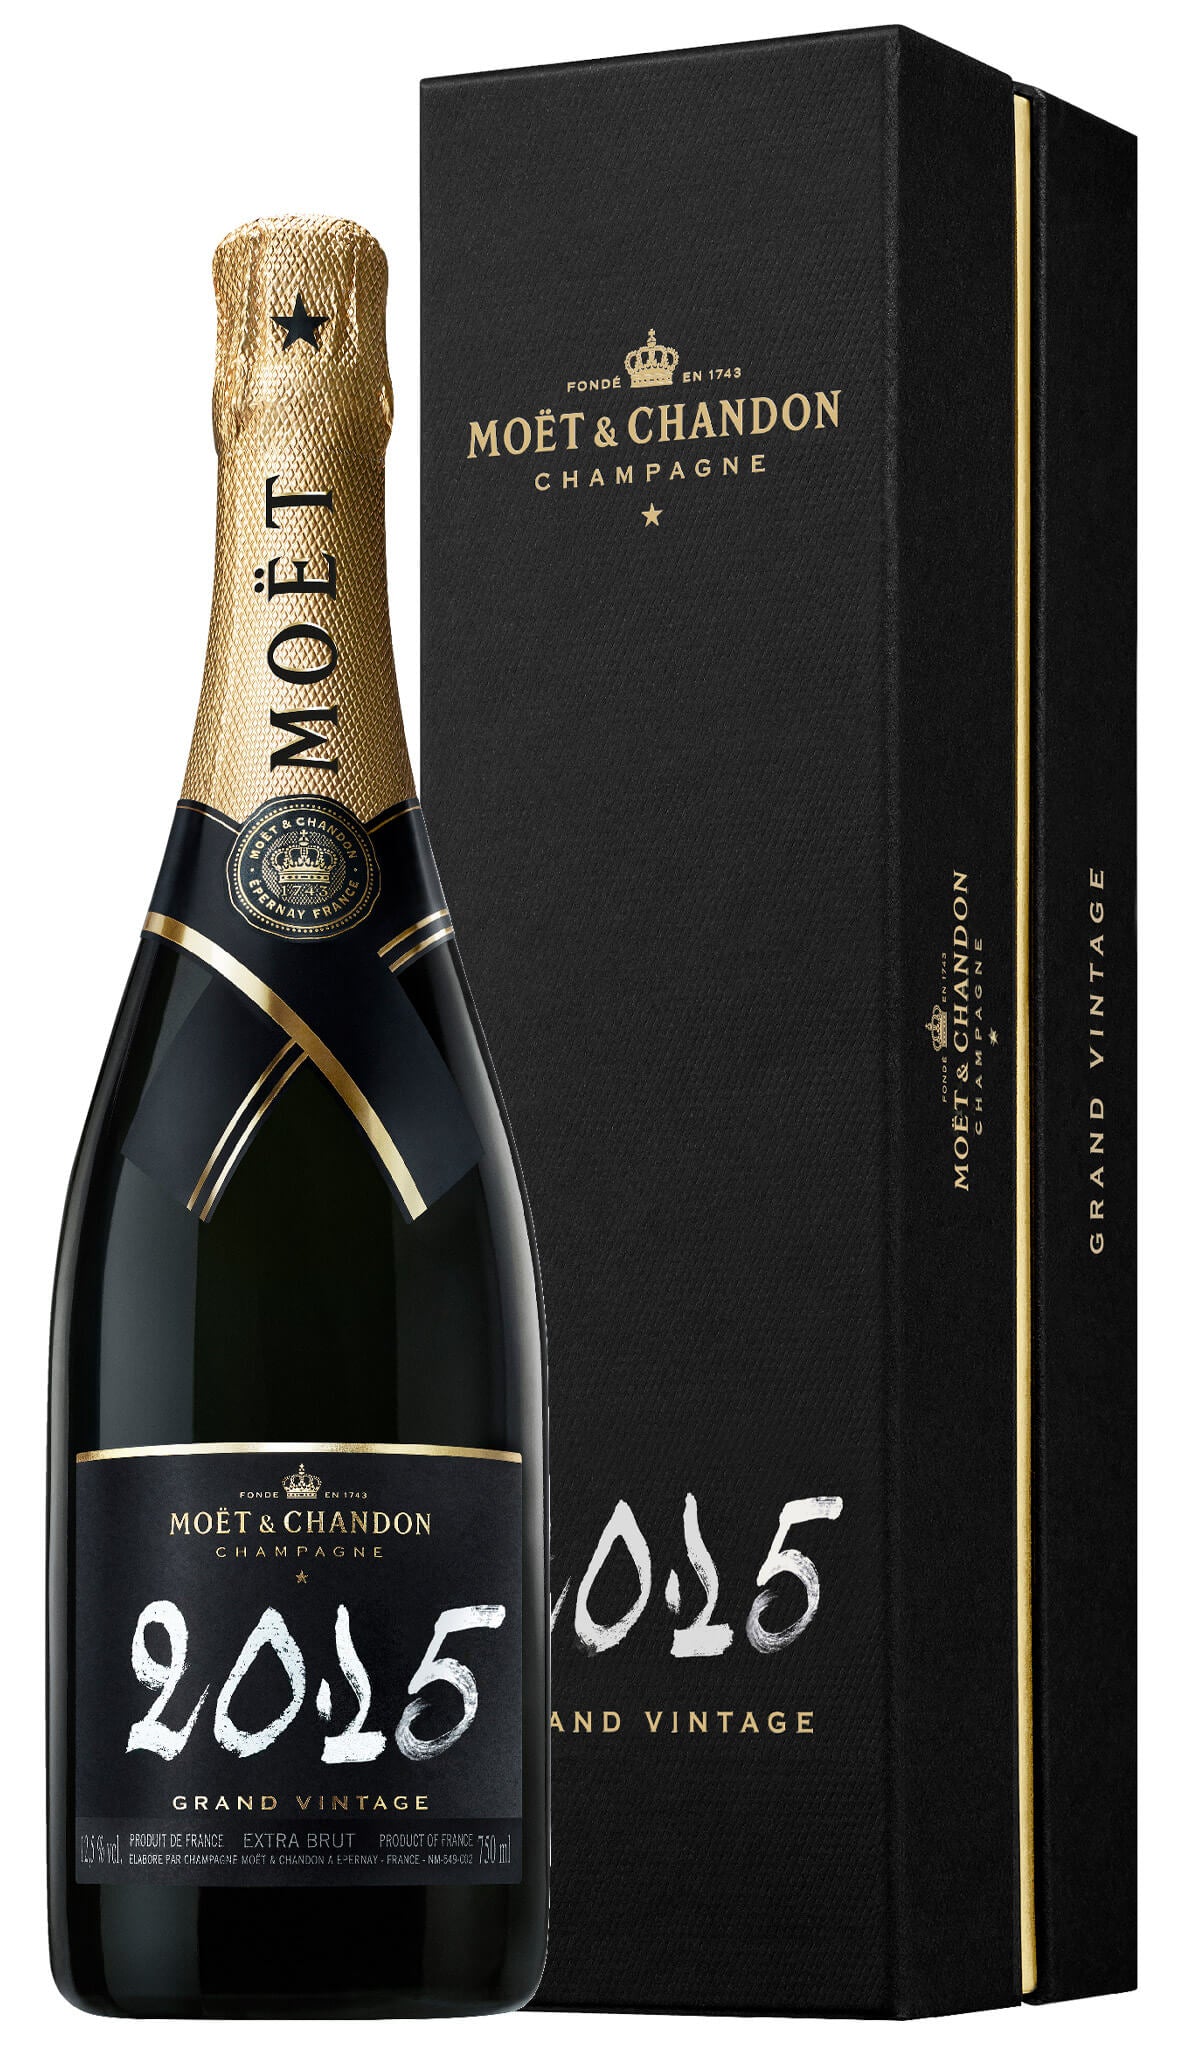 Find out more or buy Moët & Chandon Grand Vintage Extra Brut 2015 Champagne online at Wine Sellers Direct - Australia’s independent liquor specialists.